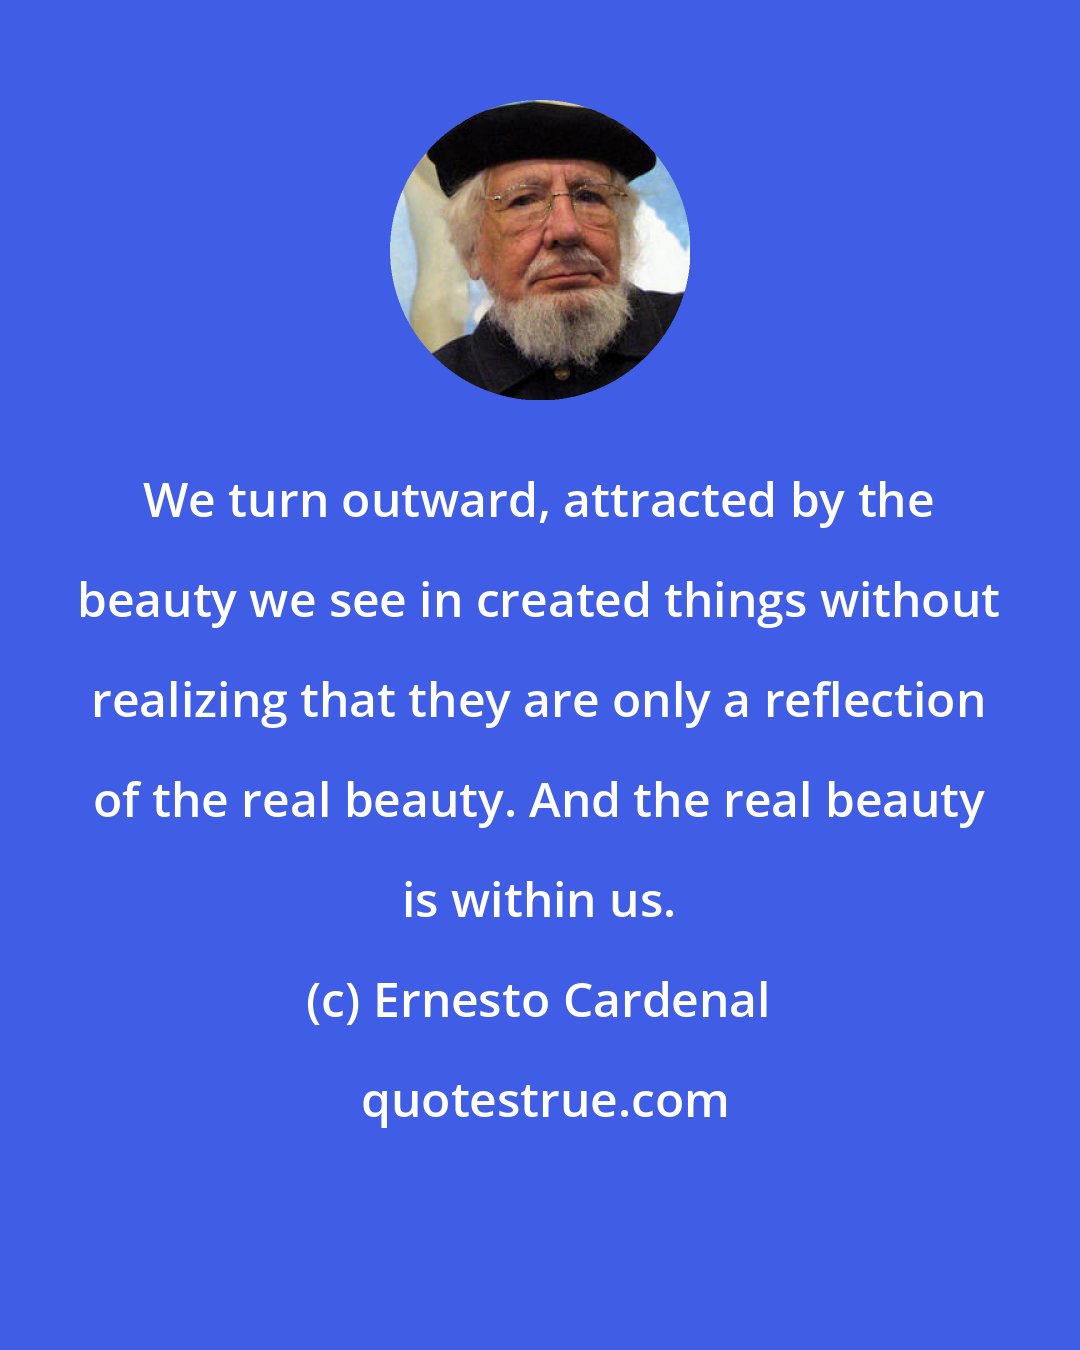 Ernesto Cardenal: We turn outward, attracted by the beauty we see in created things without realizing that they are only a reflection of the real beauty. And the real beauty is within us.